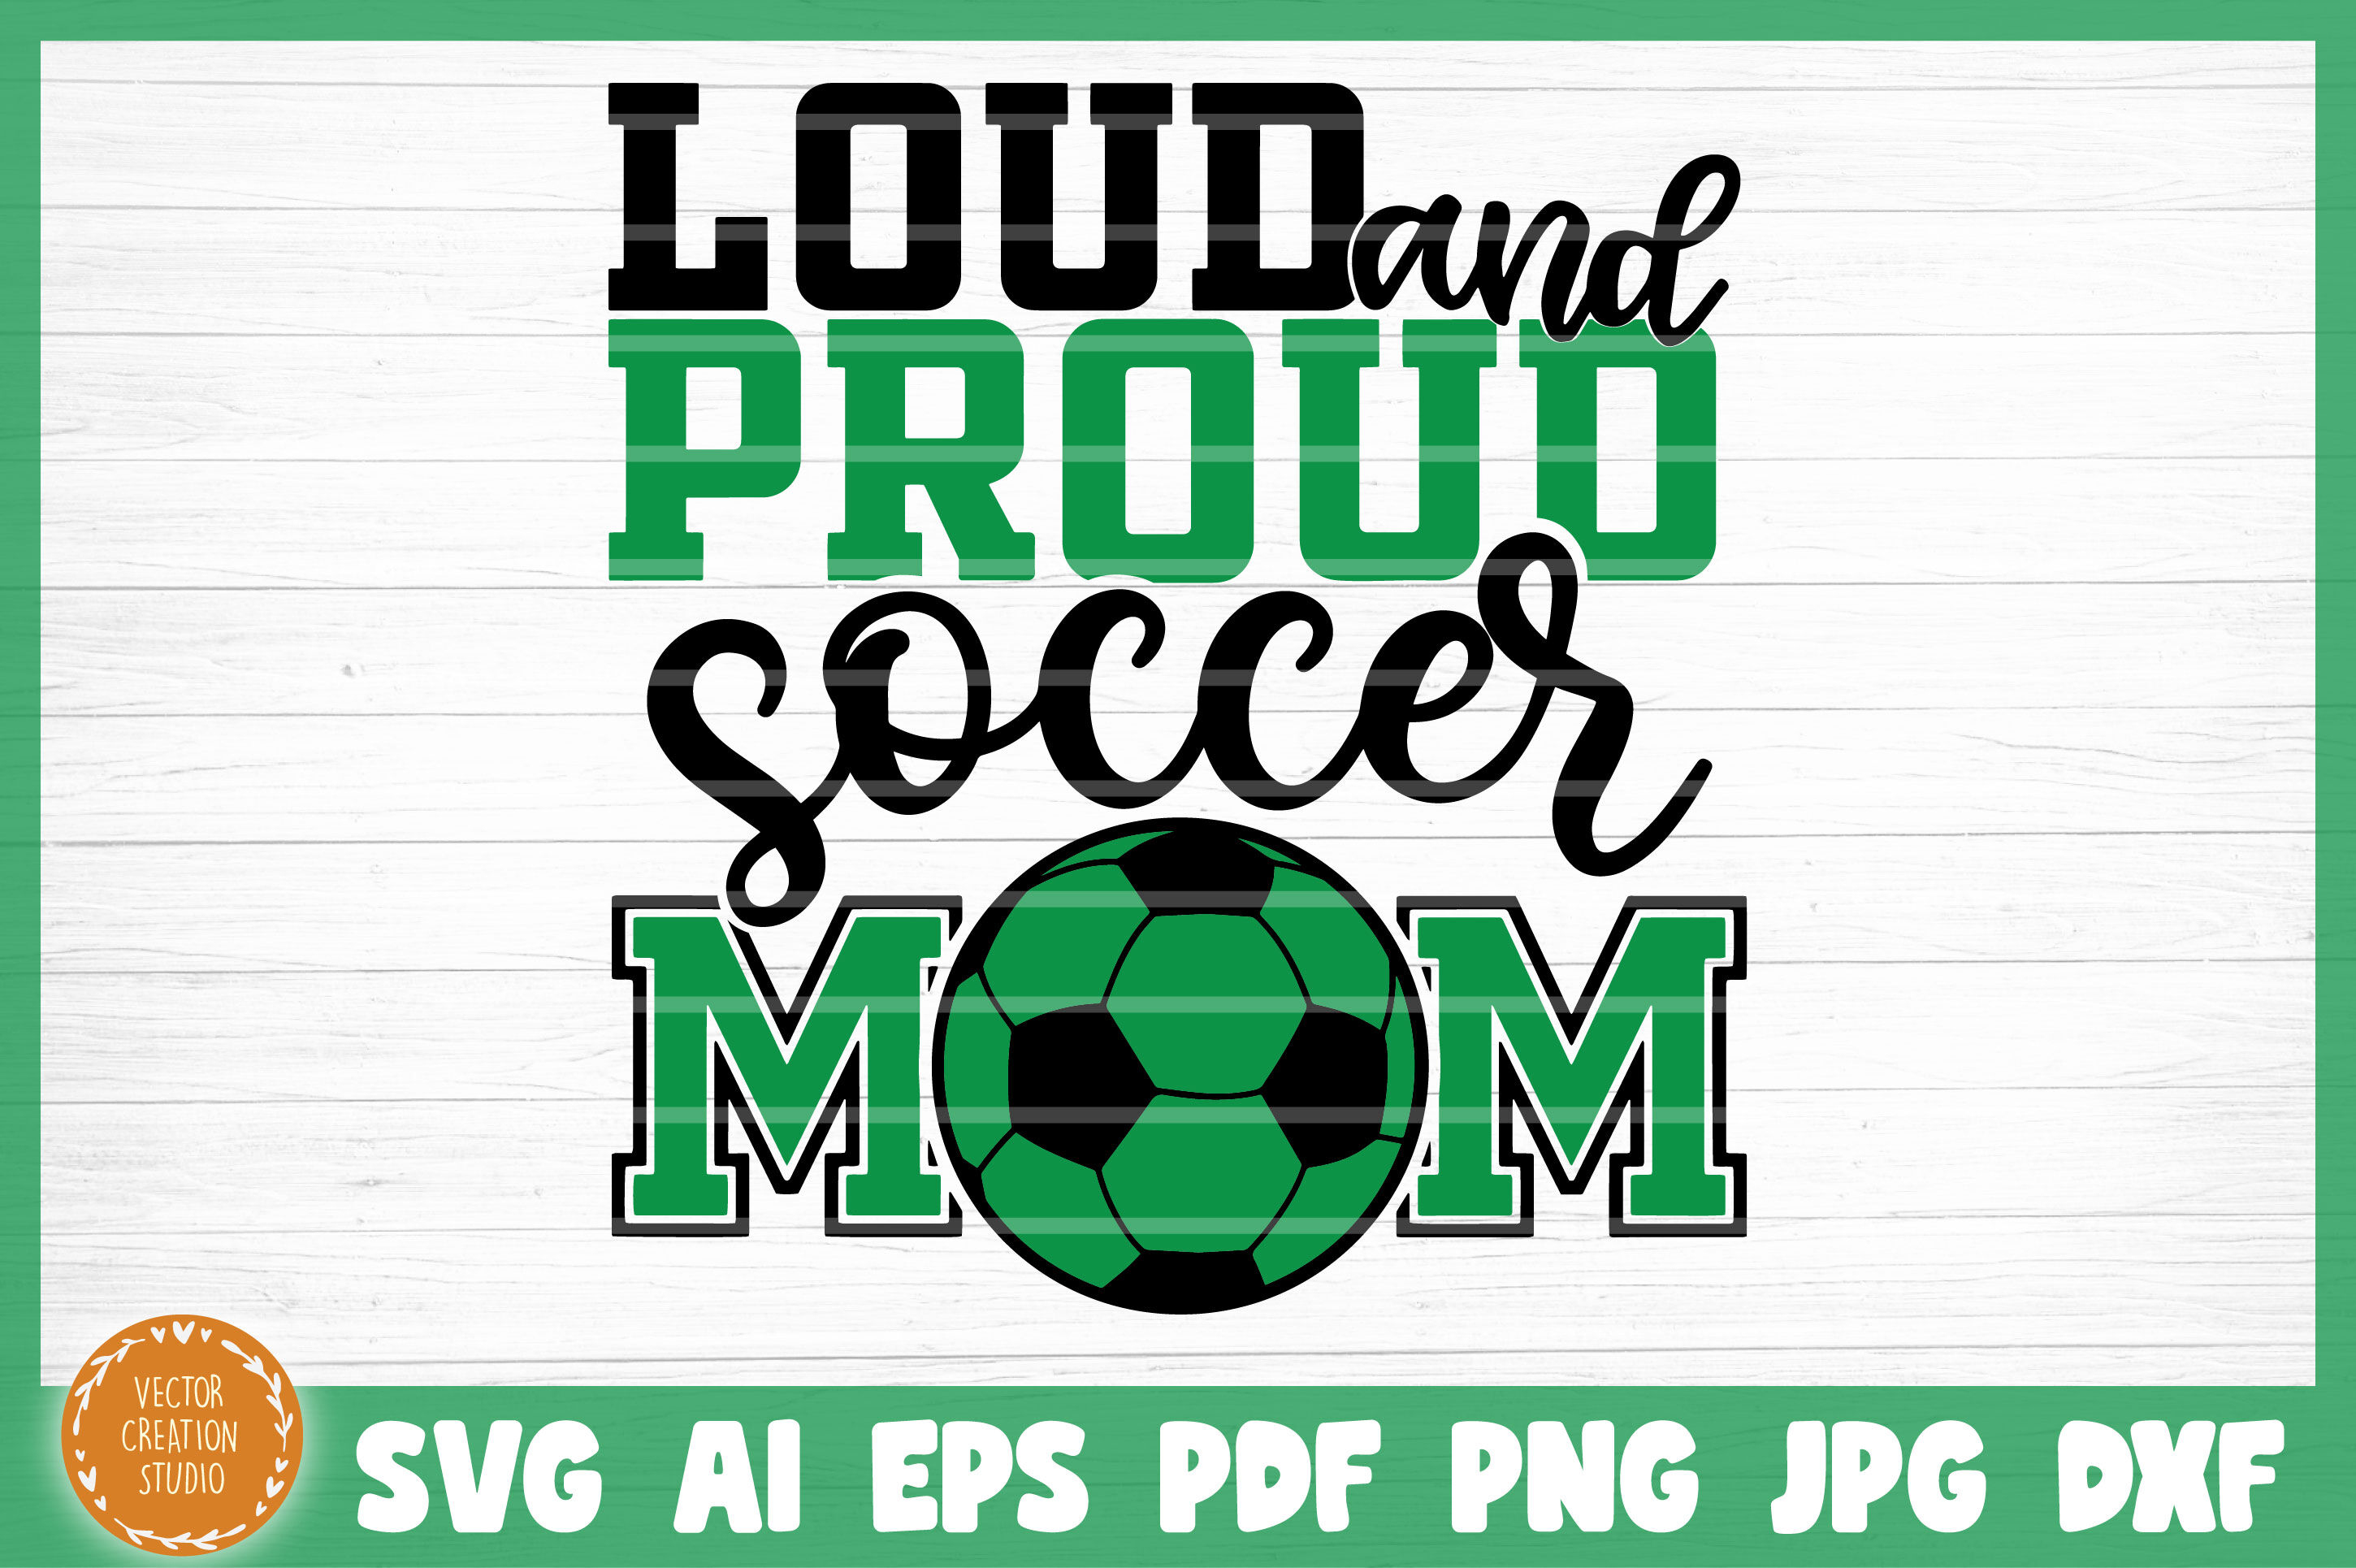 Download Loud And Proud Soccer Mom Svg Cut File By Vectorcreationstudio Thehungryjpeg Com